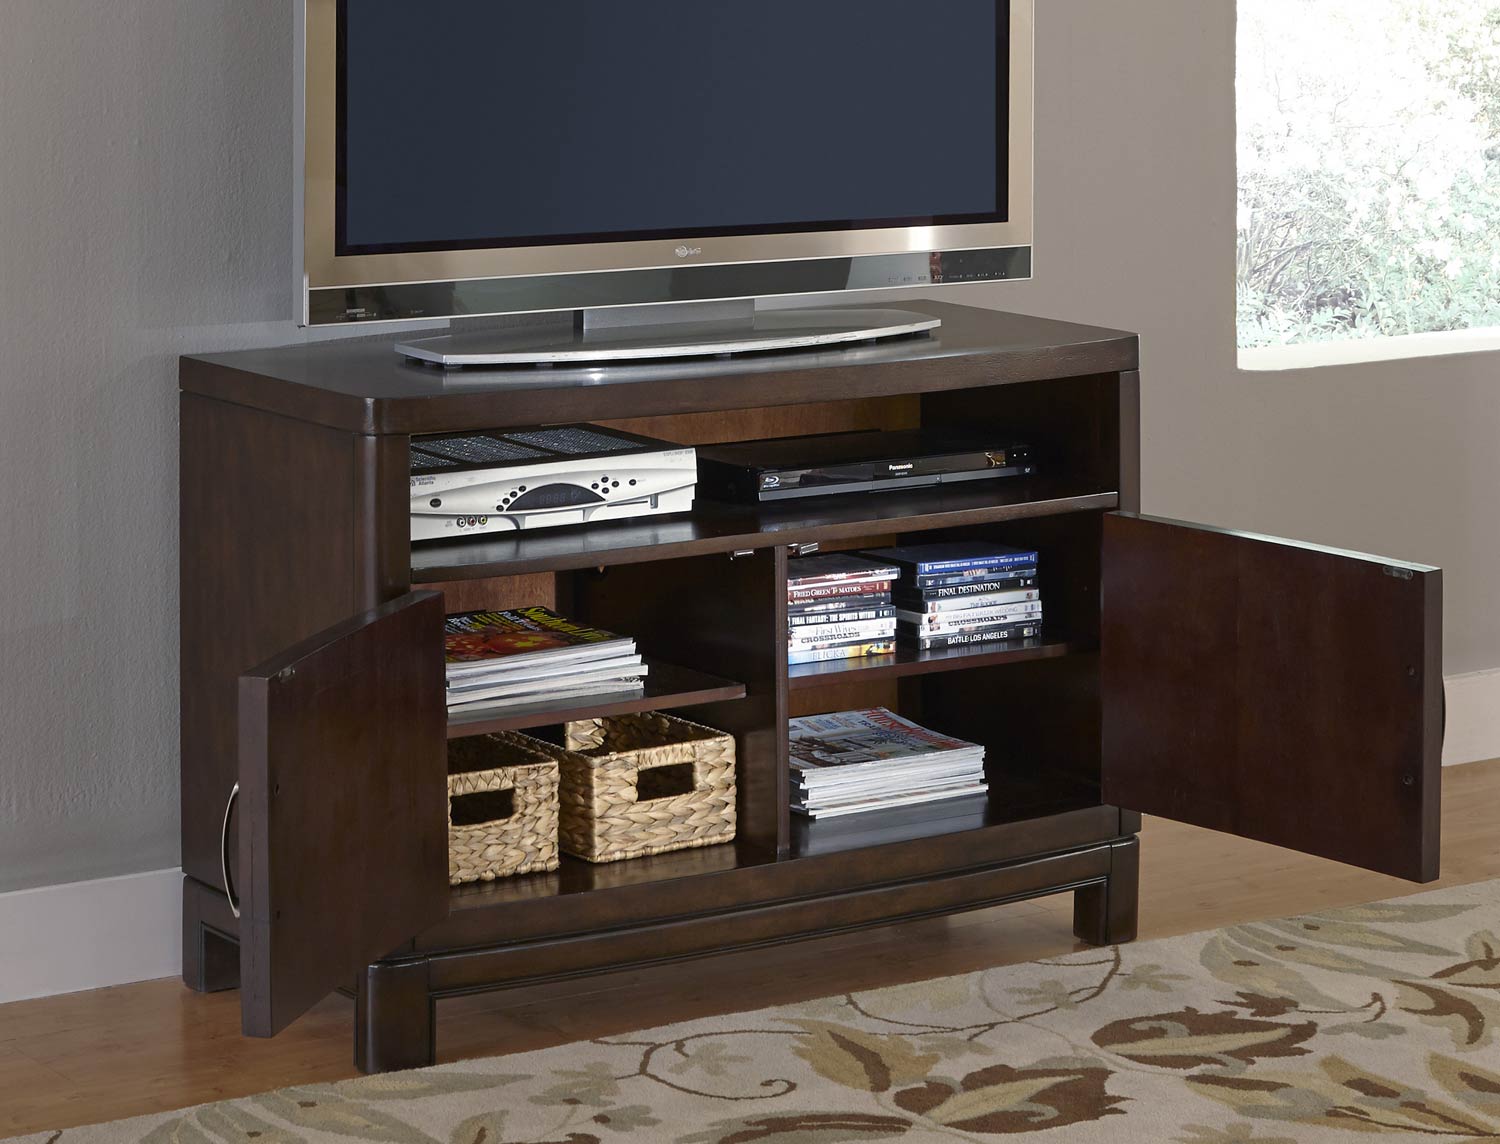 Home Styles Crescent Hill 44 Inch TV Stand - Two-tone tortoise shell